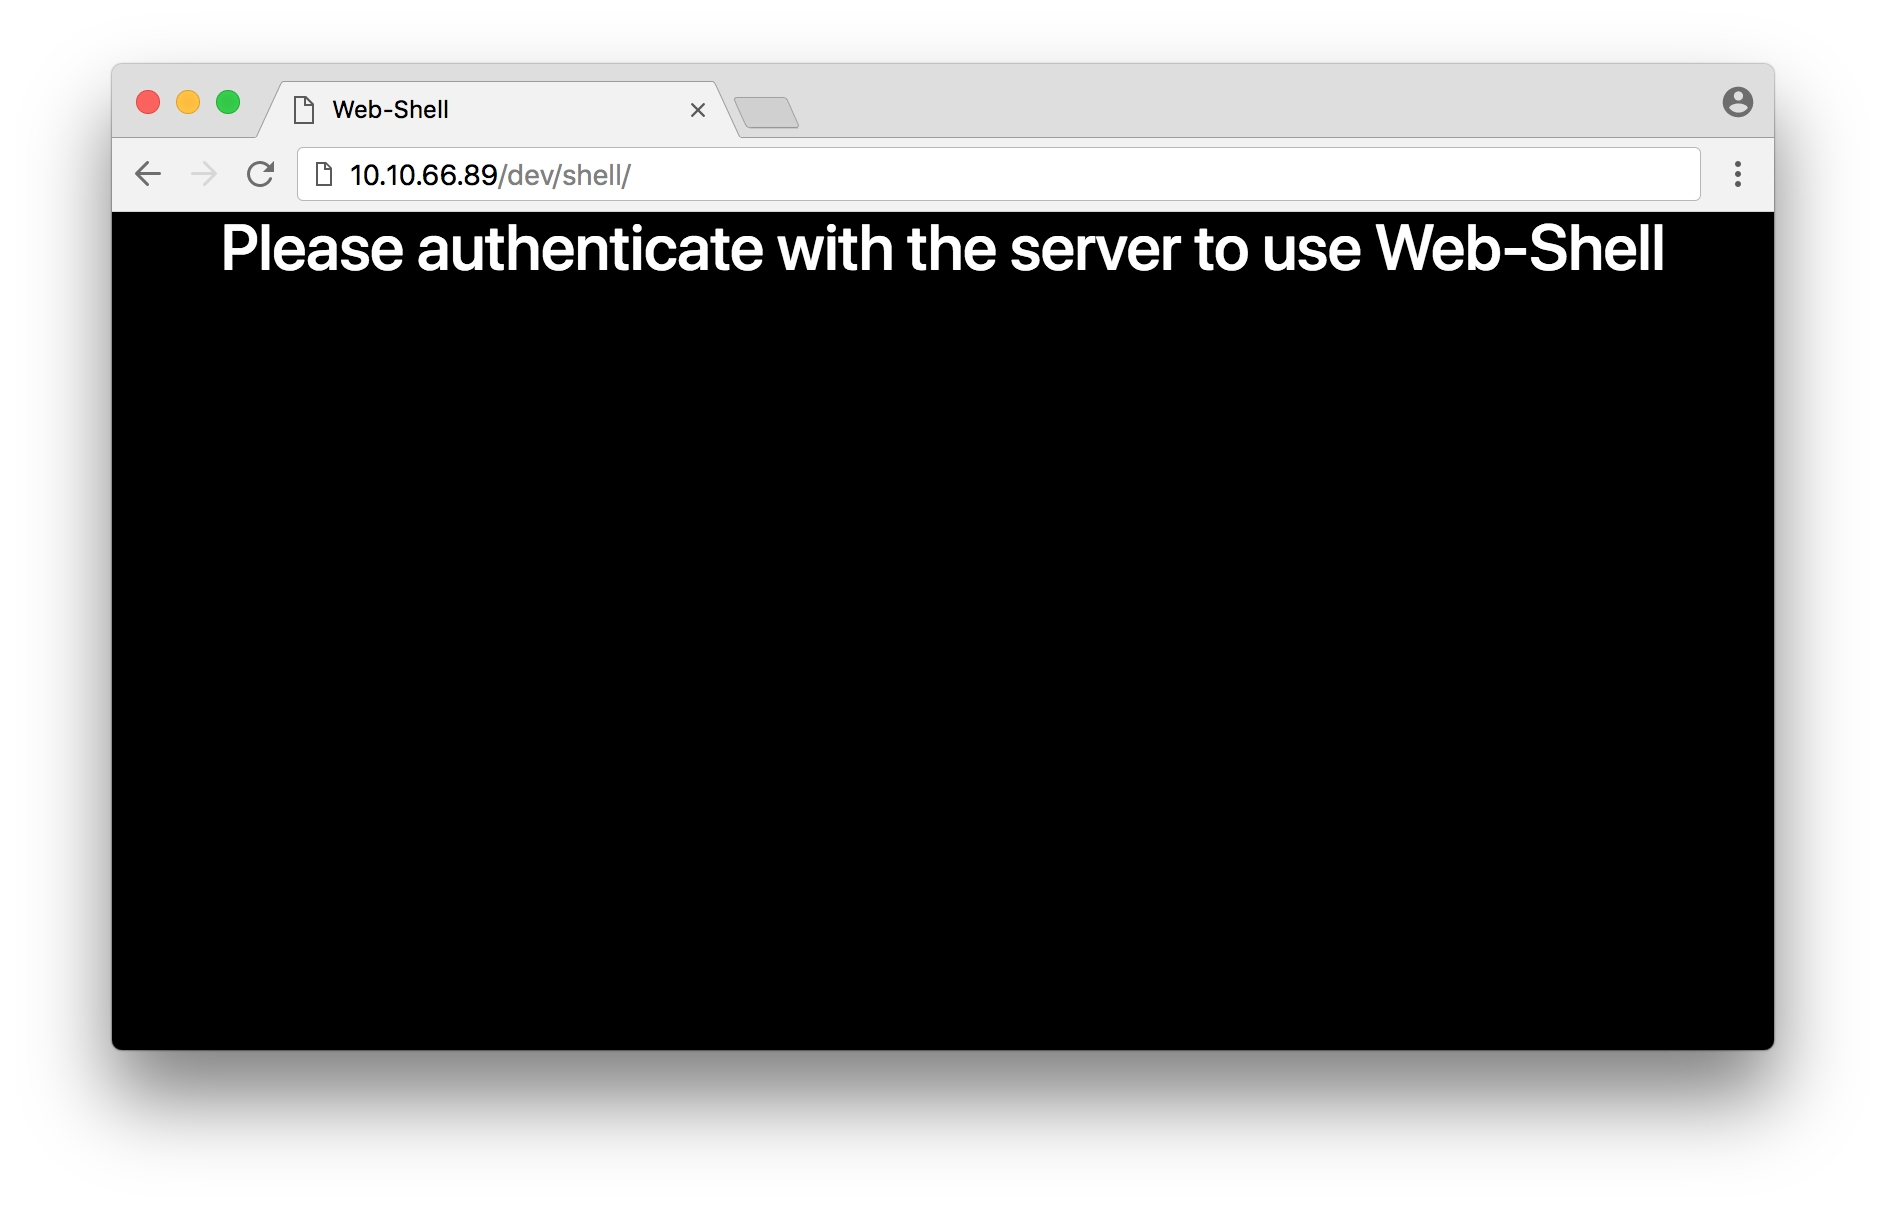 webshell_unauth